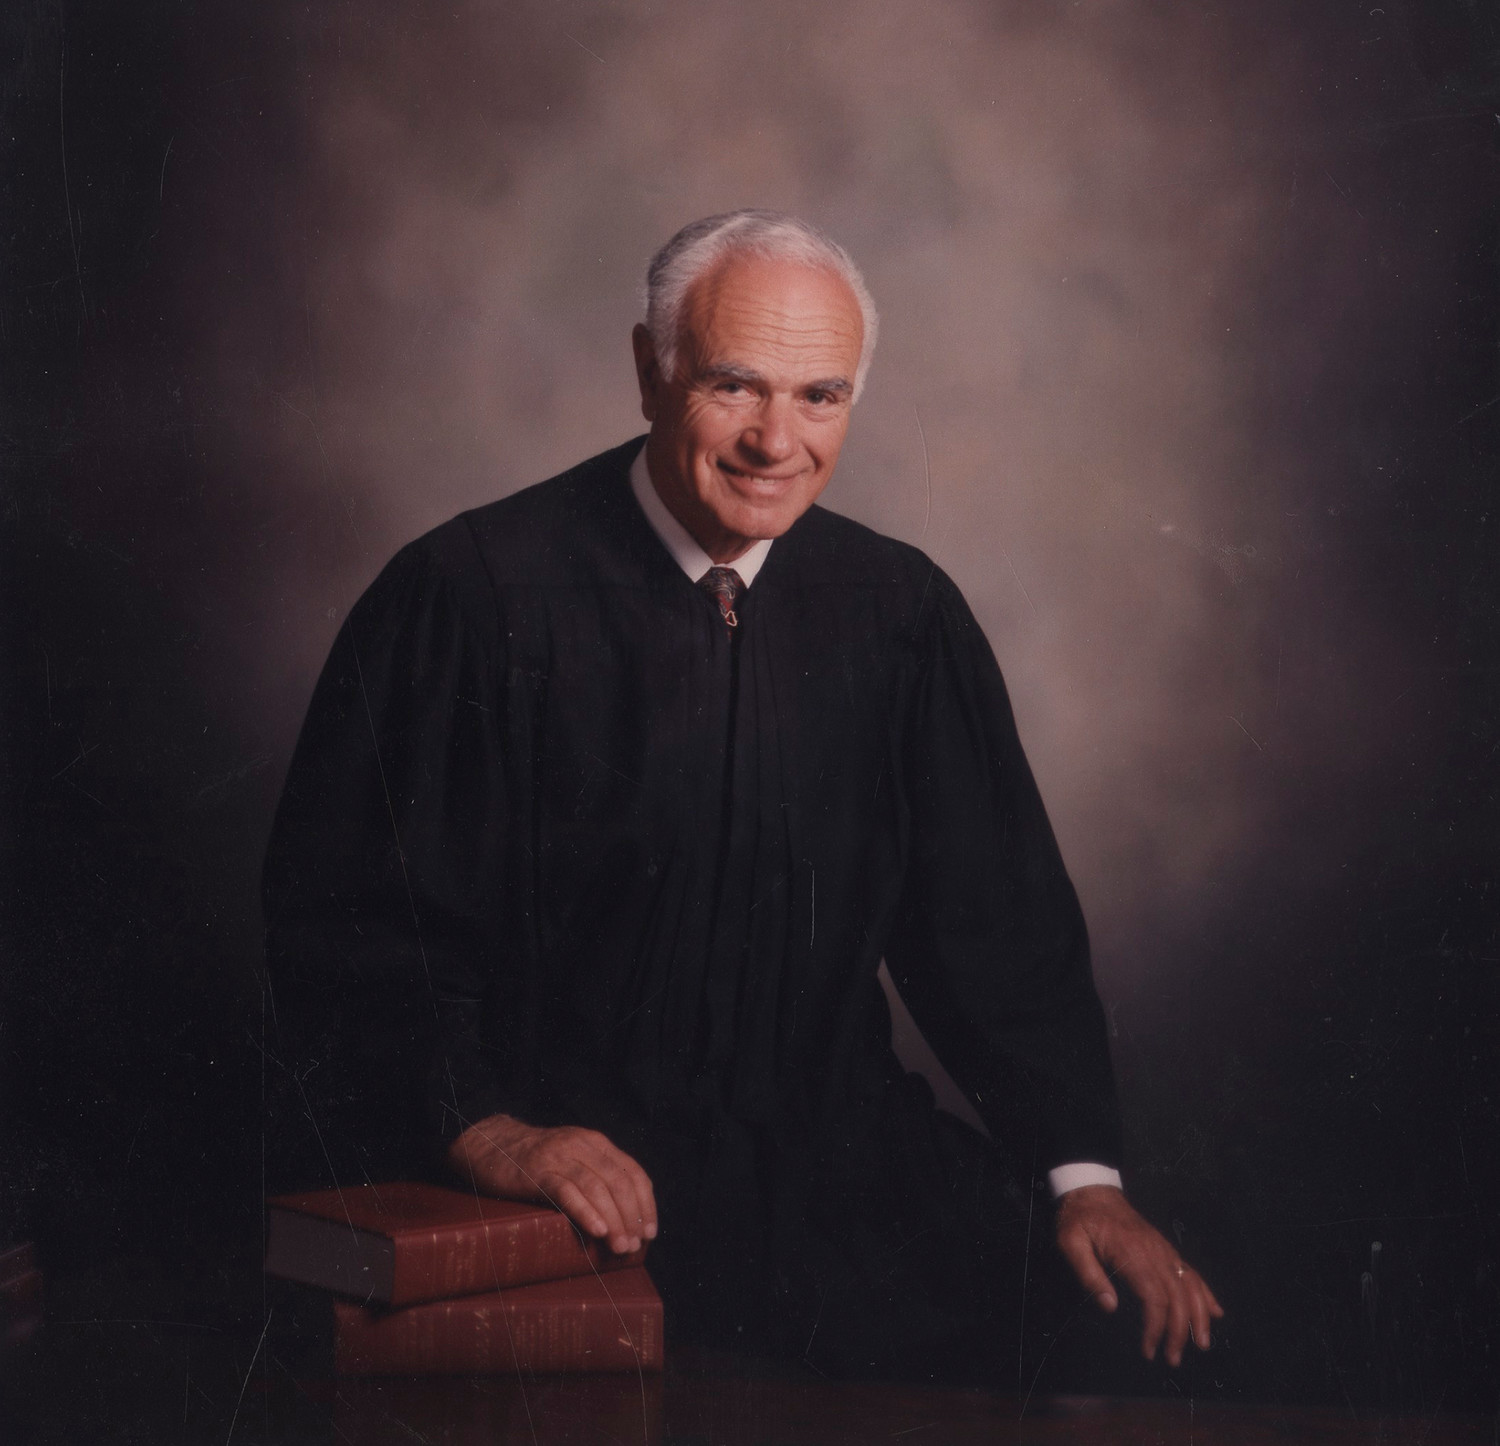 Long Beach's Jack Mackston, longtime judge who went after slumlords